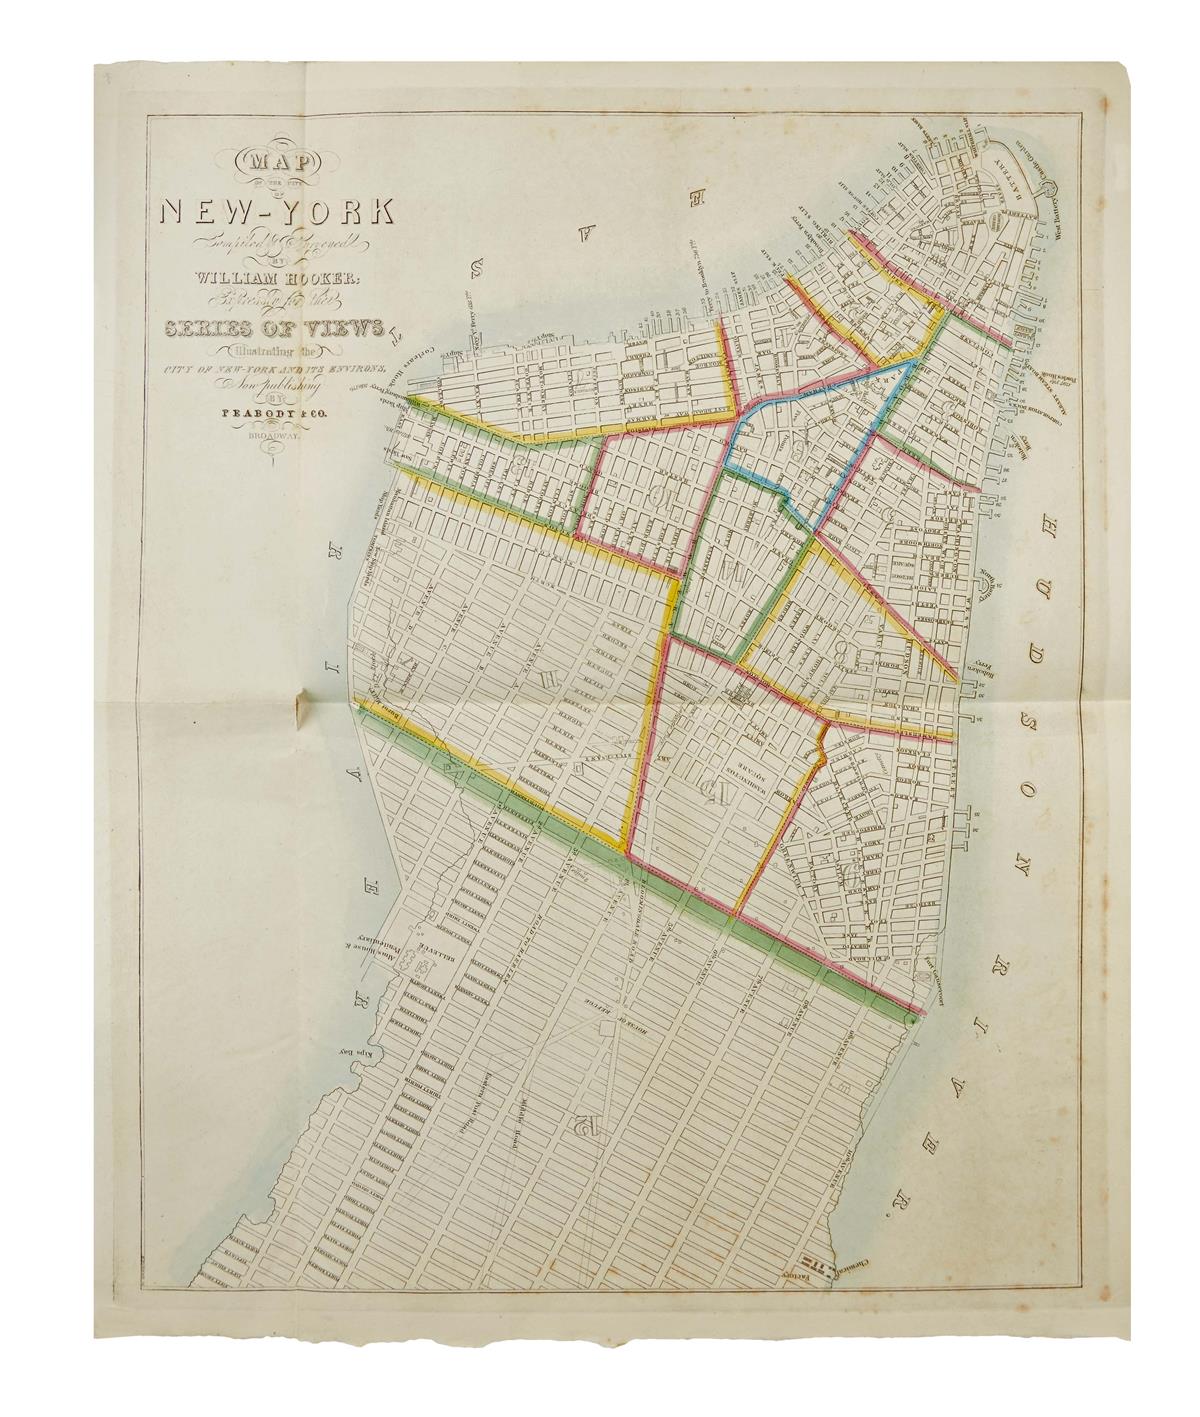 (NEW YORK CITY.) Fay, Theodore. Views in New-York and its Environs.